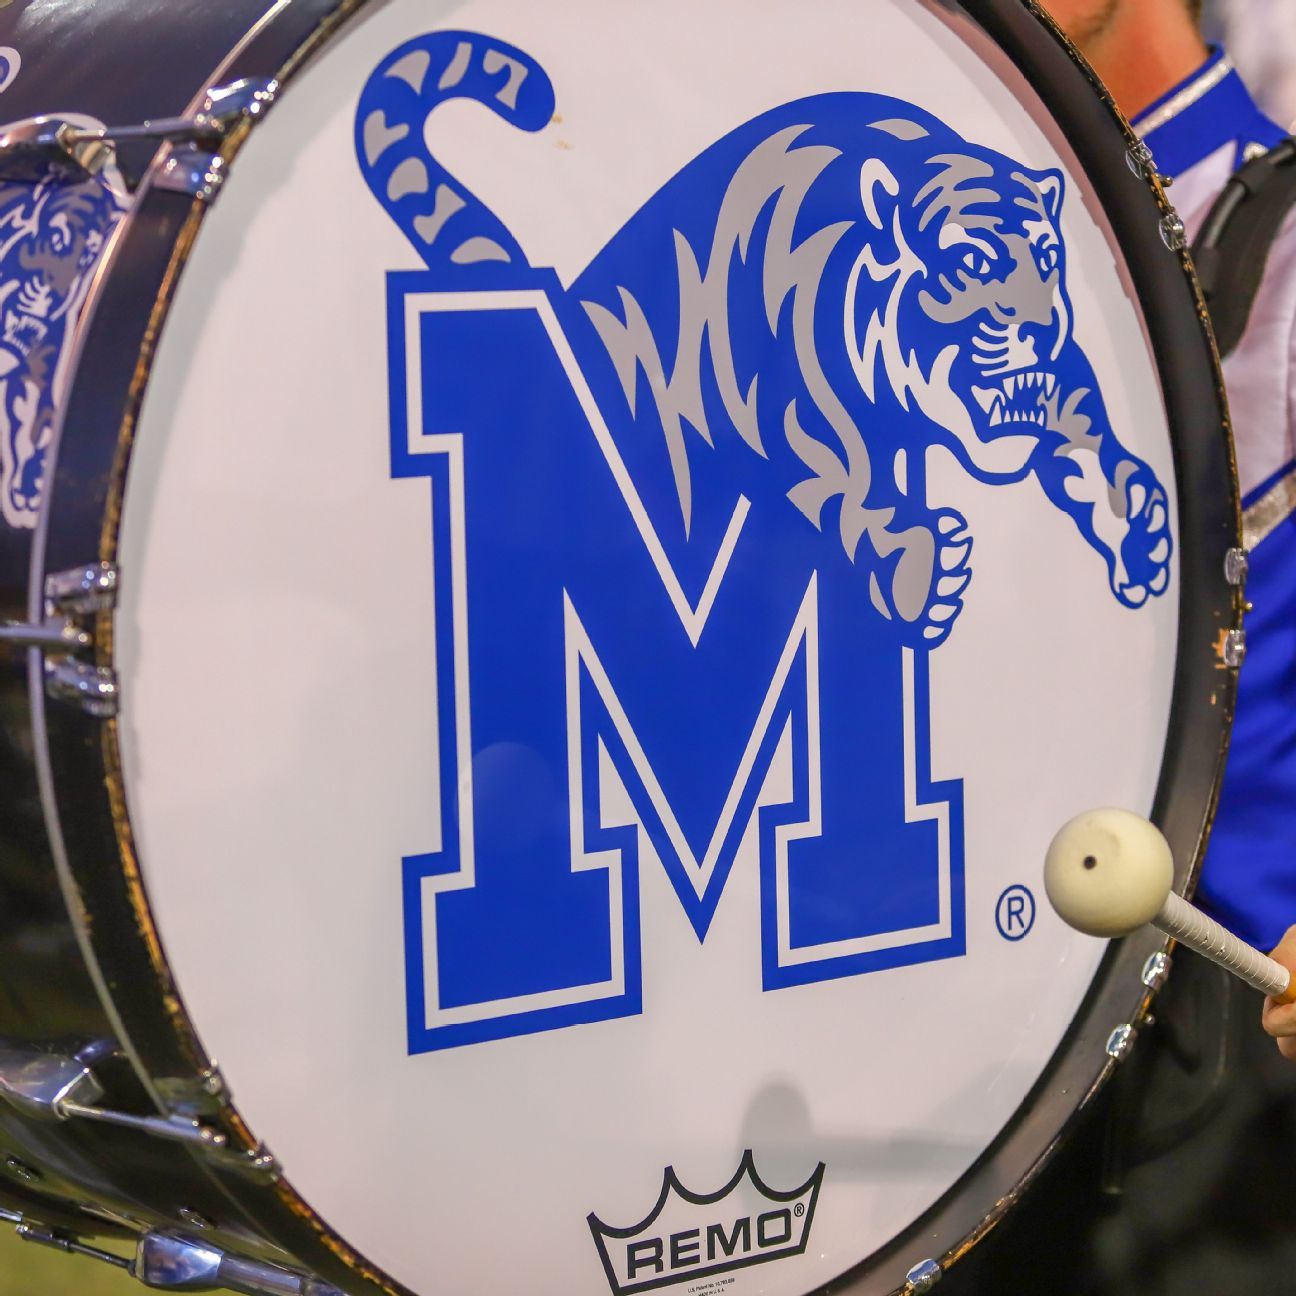 Ed Scott, a sports administrator from Virginia, is hired as Memphis AD